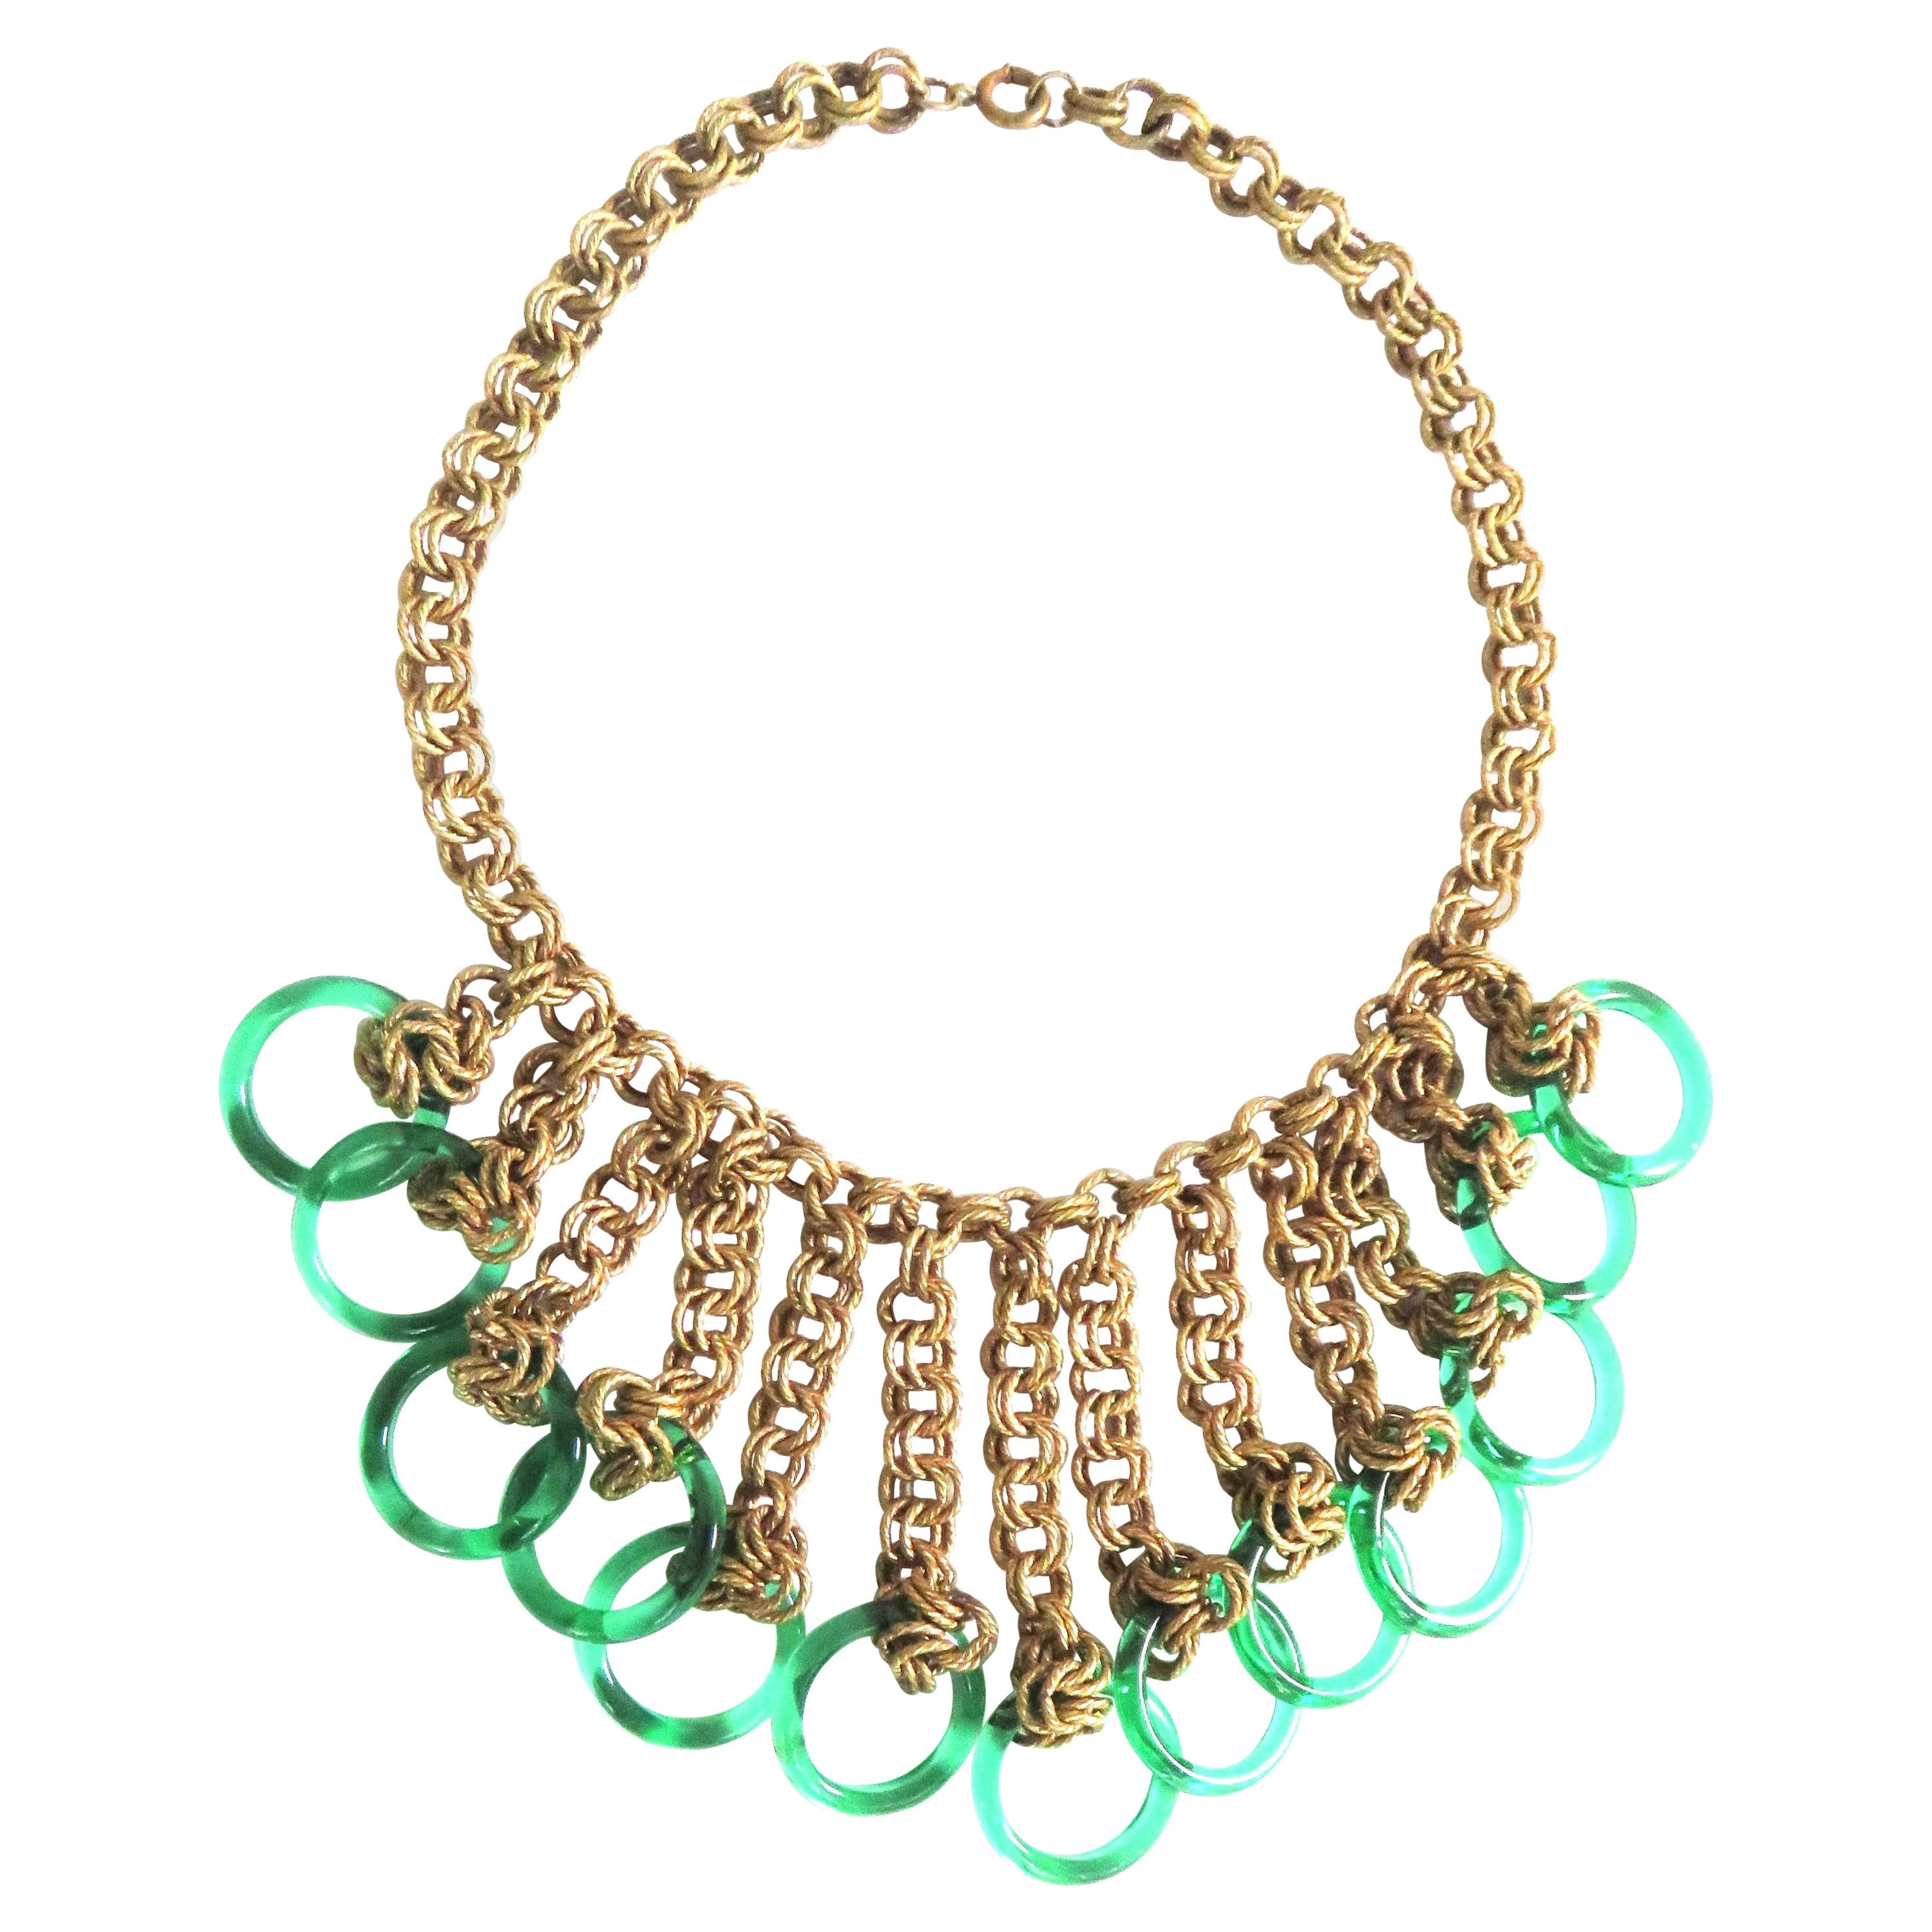 Chain Bib 1940s Necklace with Green Glass Circles For Sale